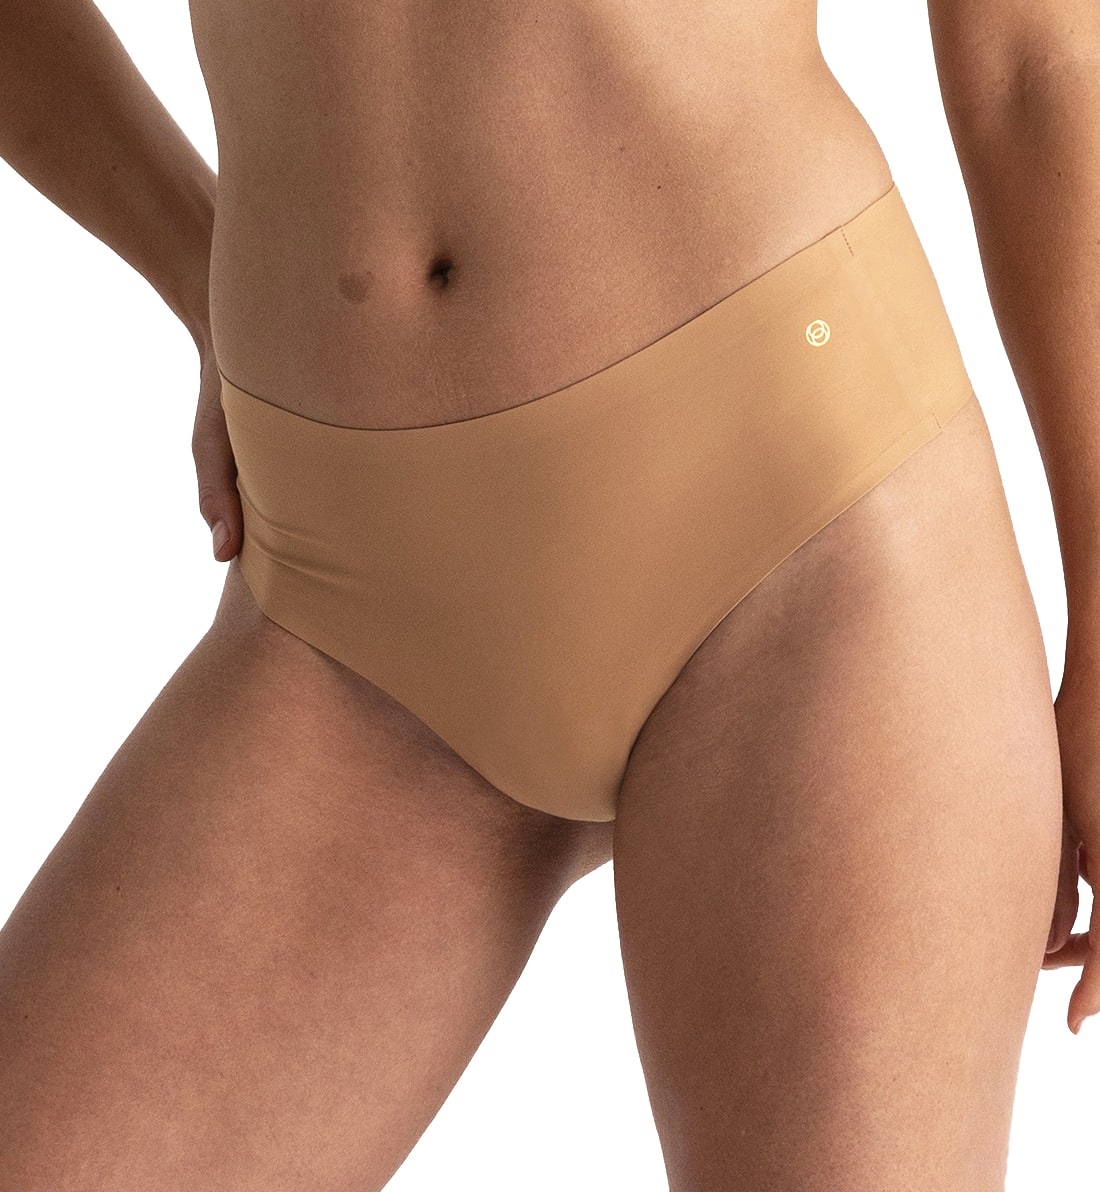 Evelyn & Bobbie High-Waisted Thong (1703/1709),US 0-14,Mica - Mica,US 0 - 14